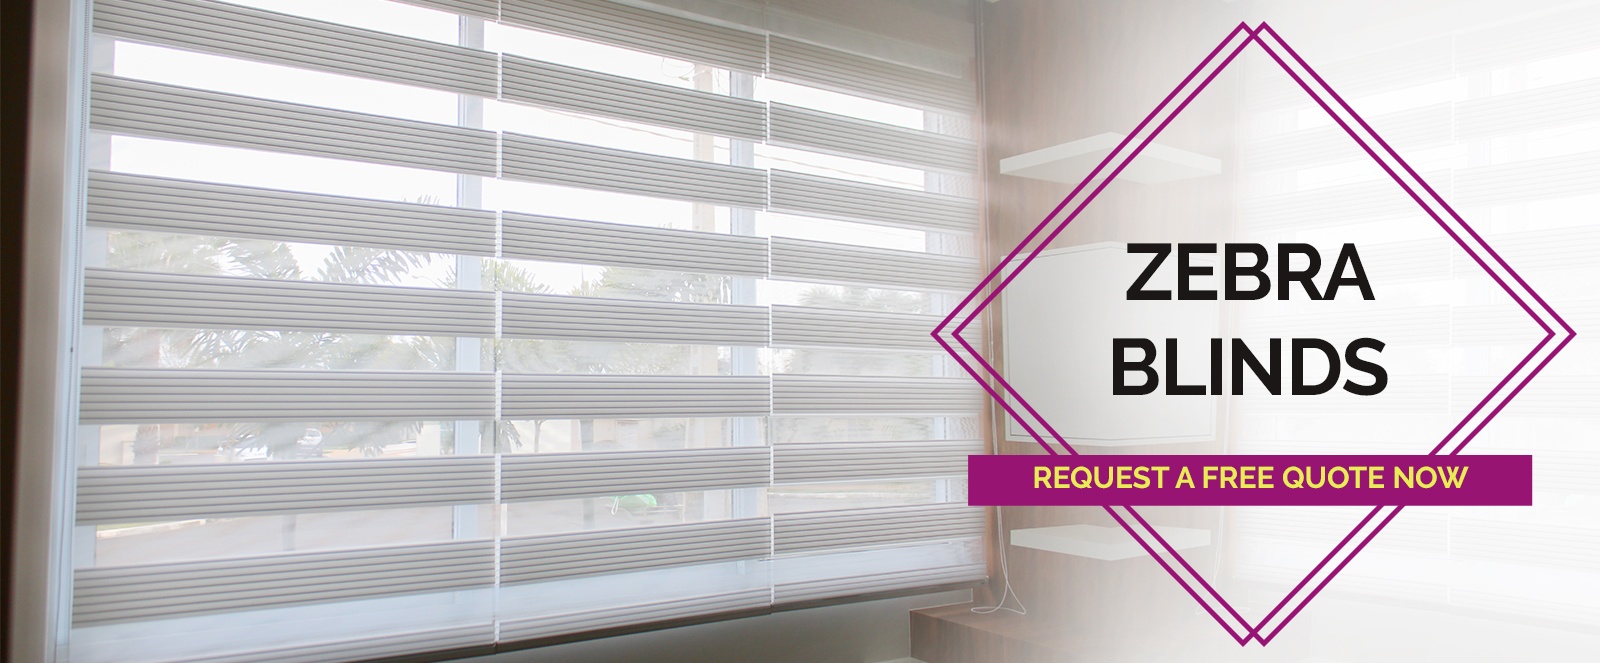 Zebra Blinds, Shades by DC Shutters - Window Treatment in Whitby, Brampton, Toronto, ON